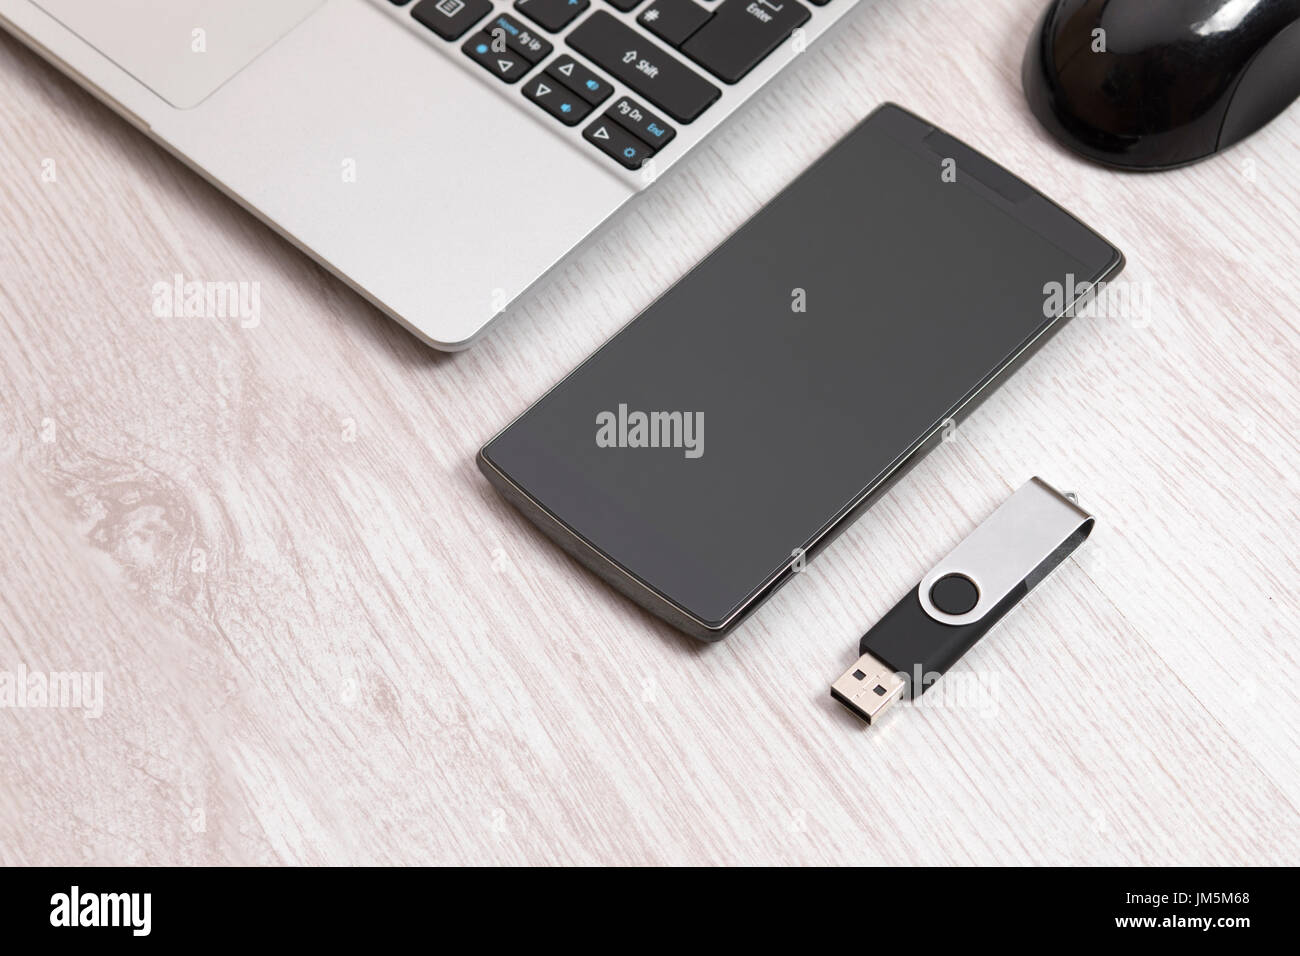 elevated view USB storage back up device on wooden surface with Laptop and smart phone Stock Photo